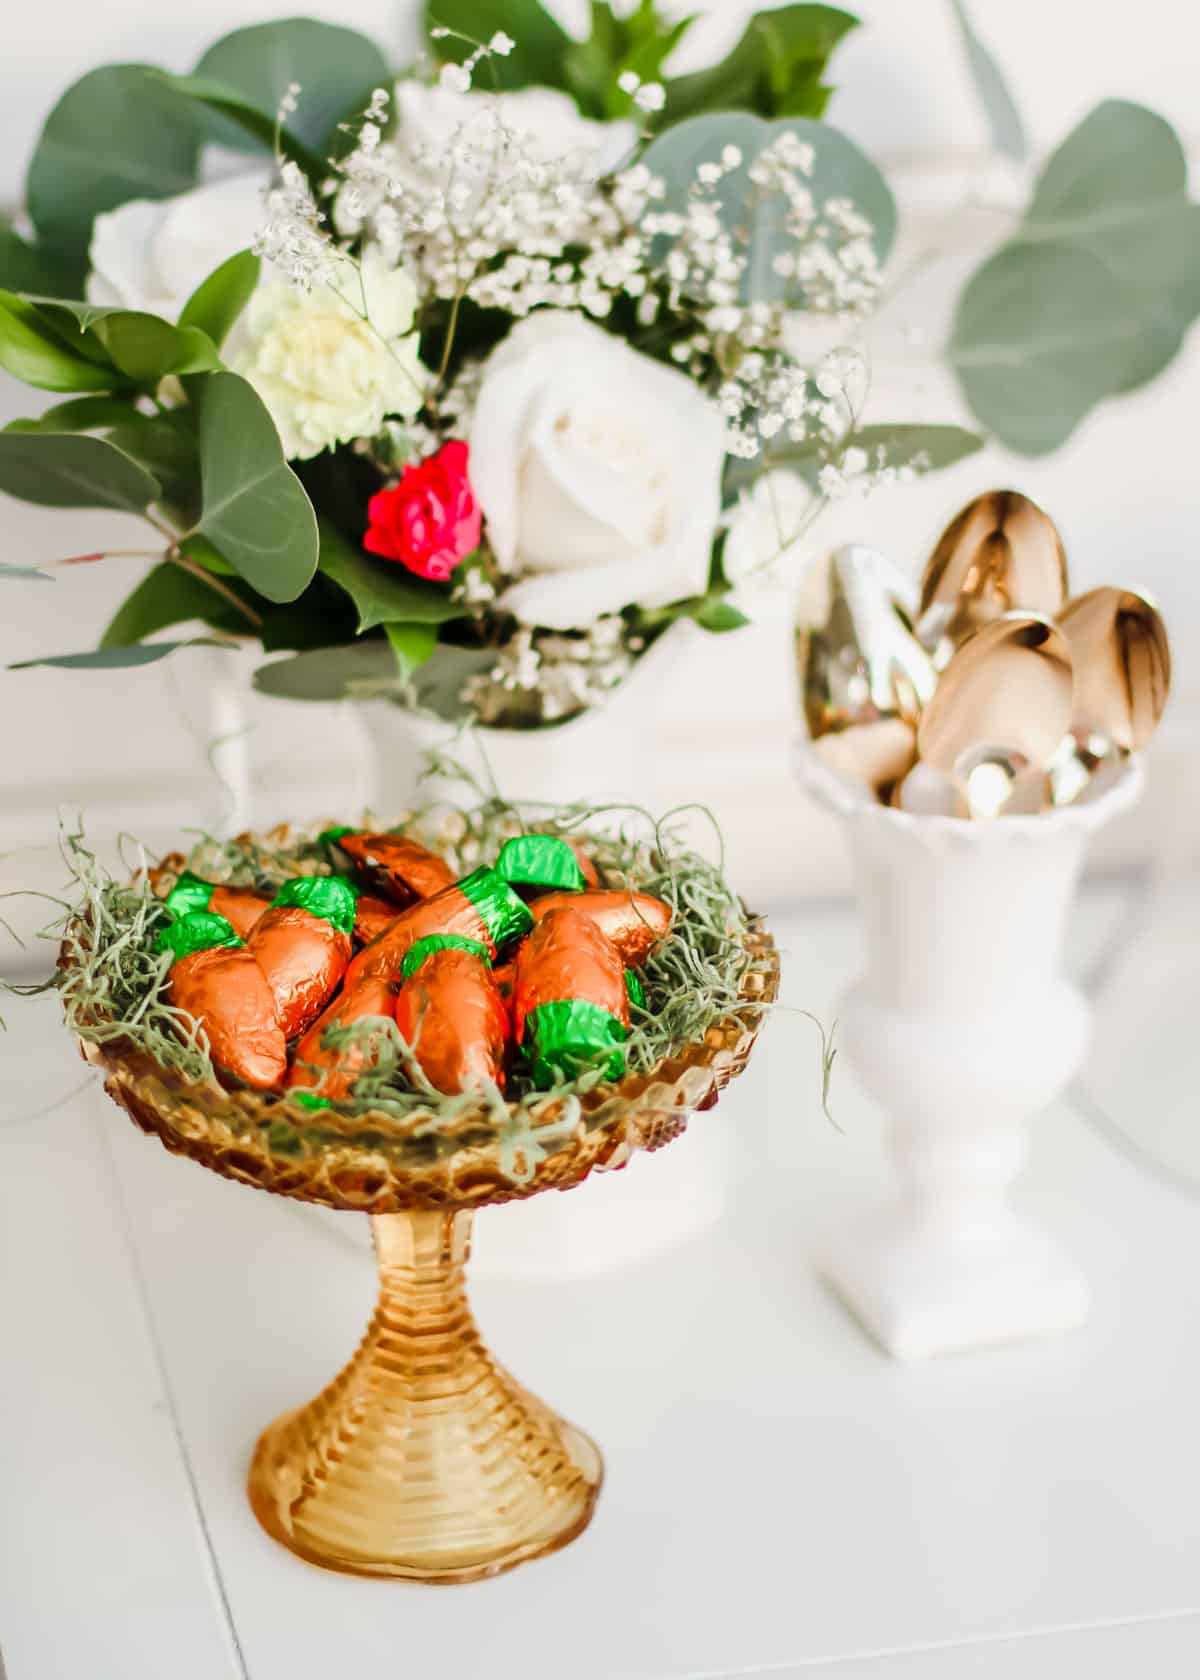 flower arrangement with dish filled with Easter candy, and white jar holding gold spoons.